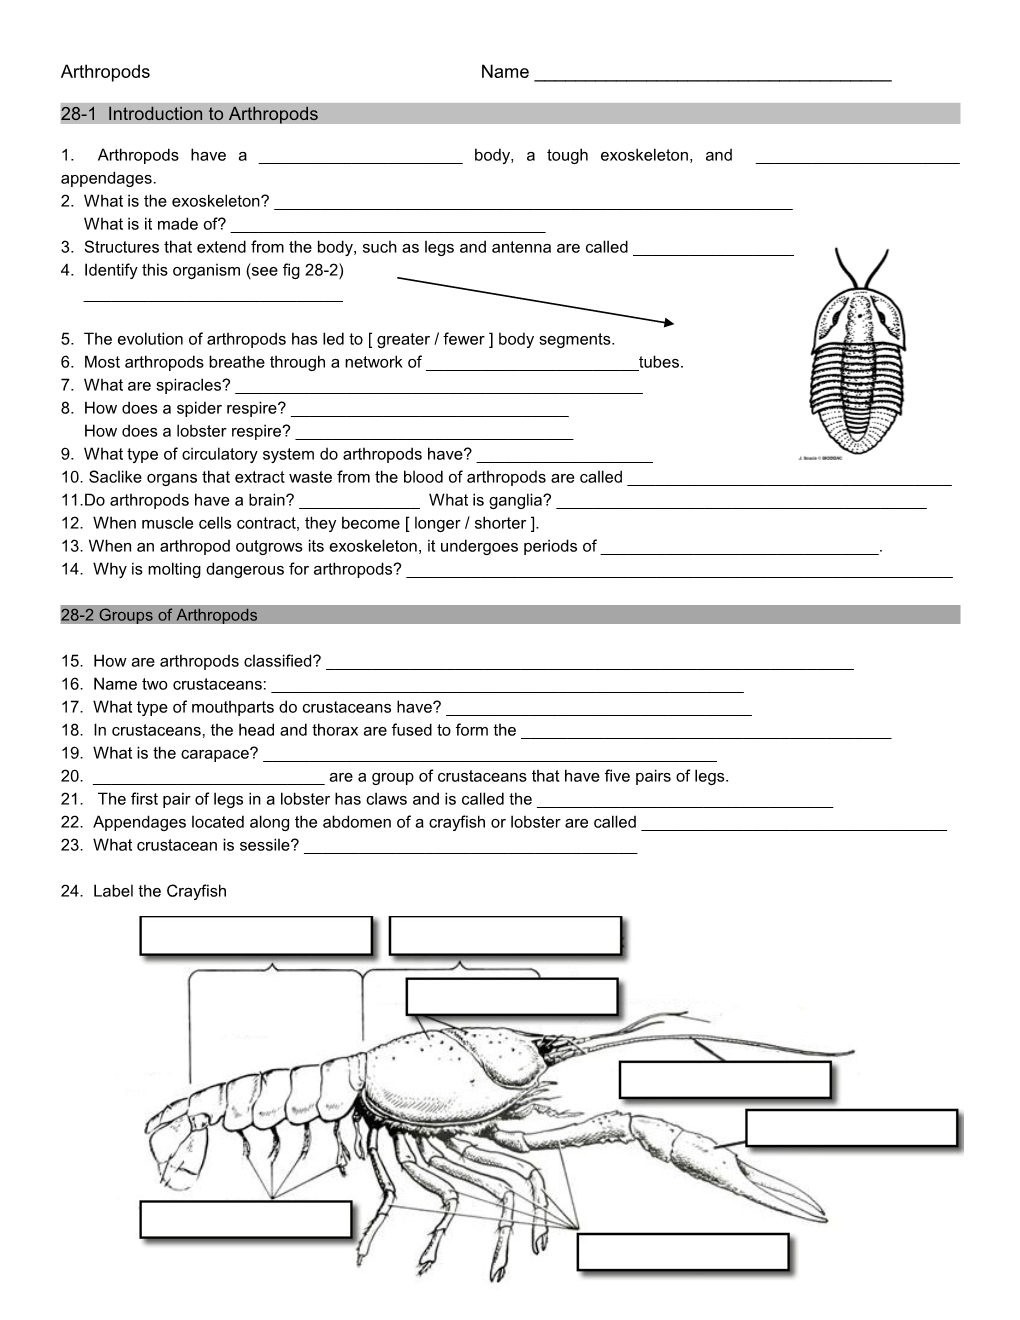 28-1 Introduction to Arthropods